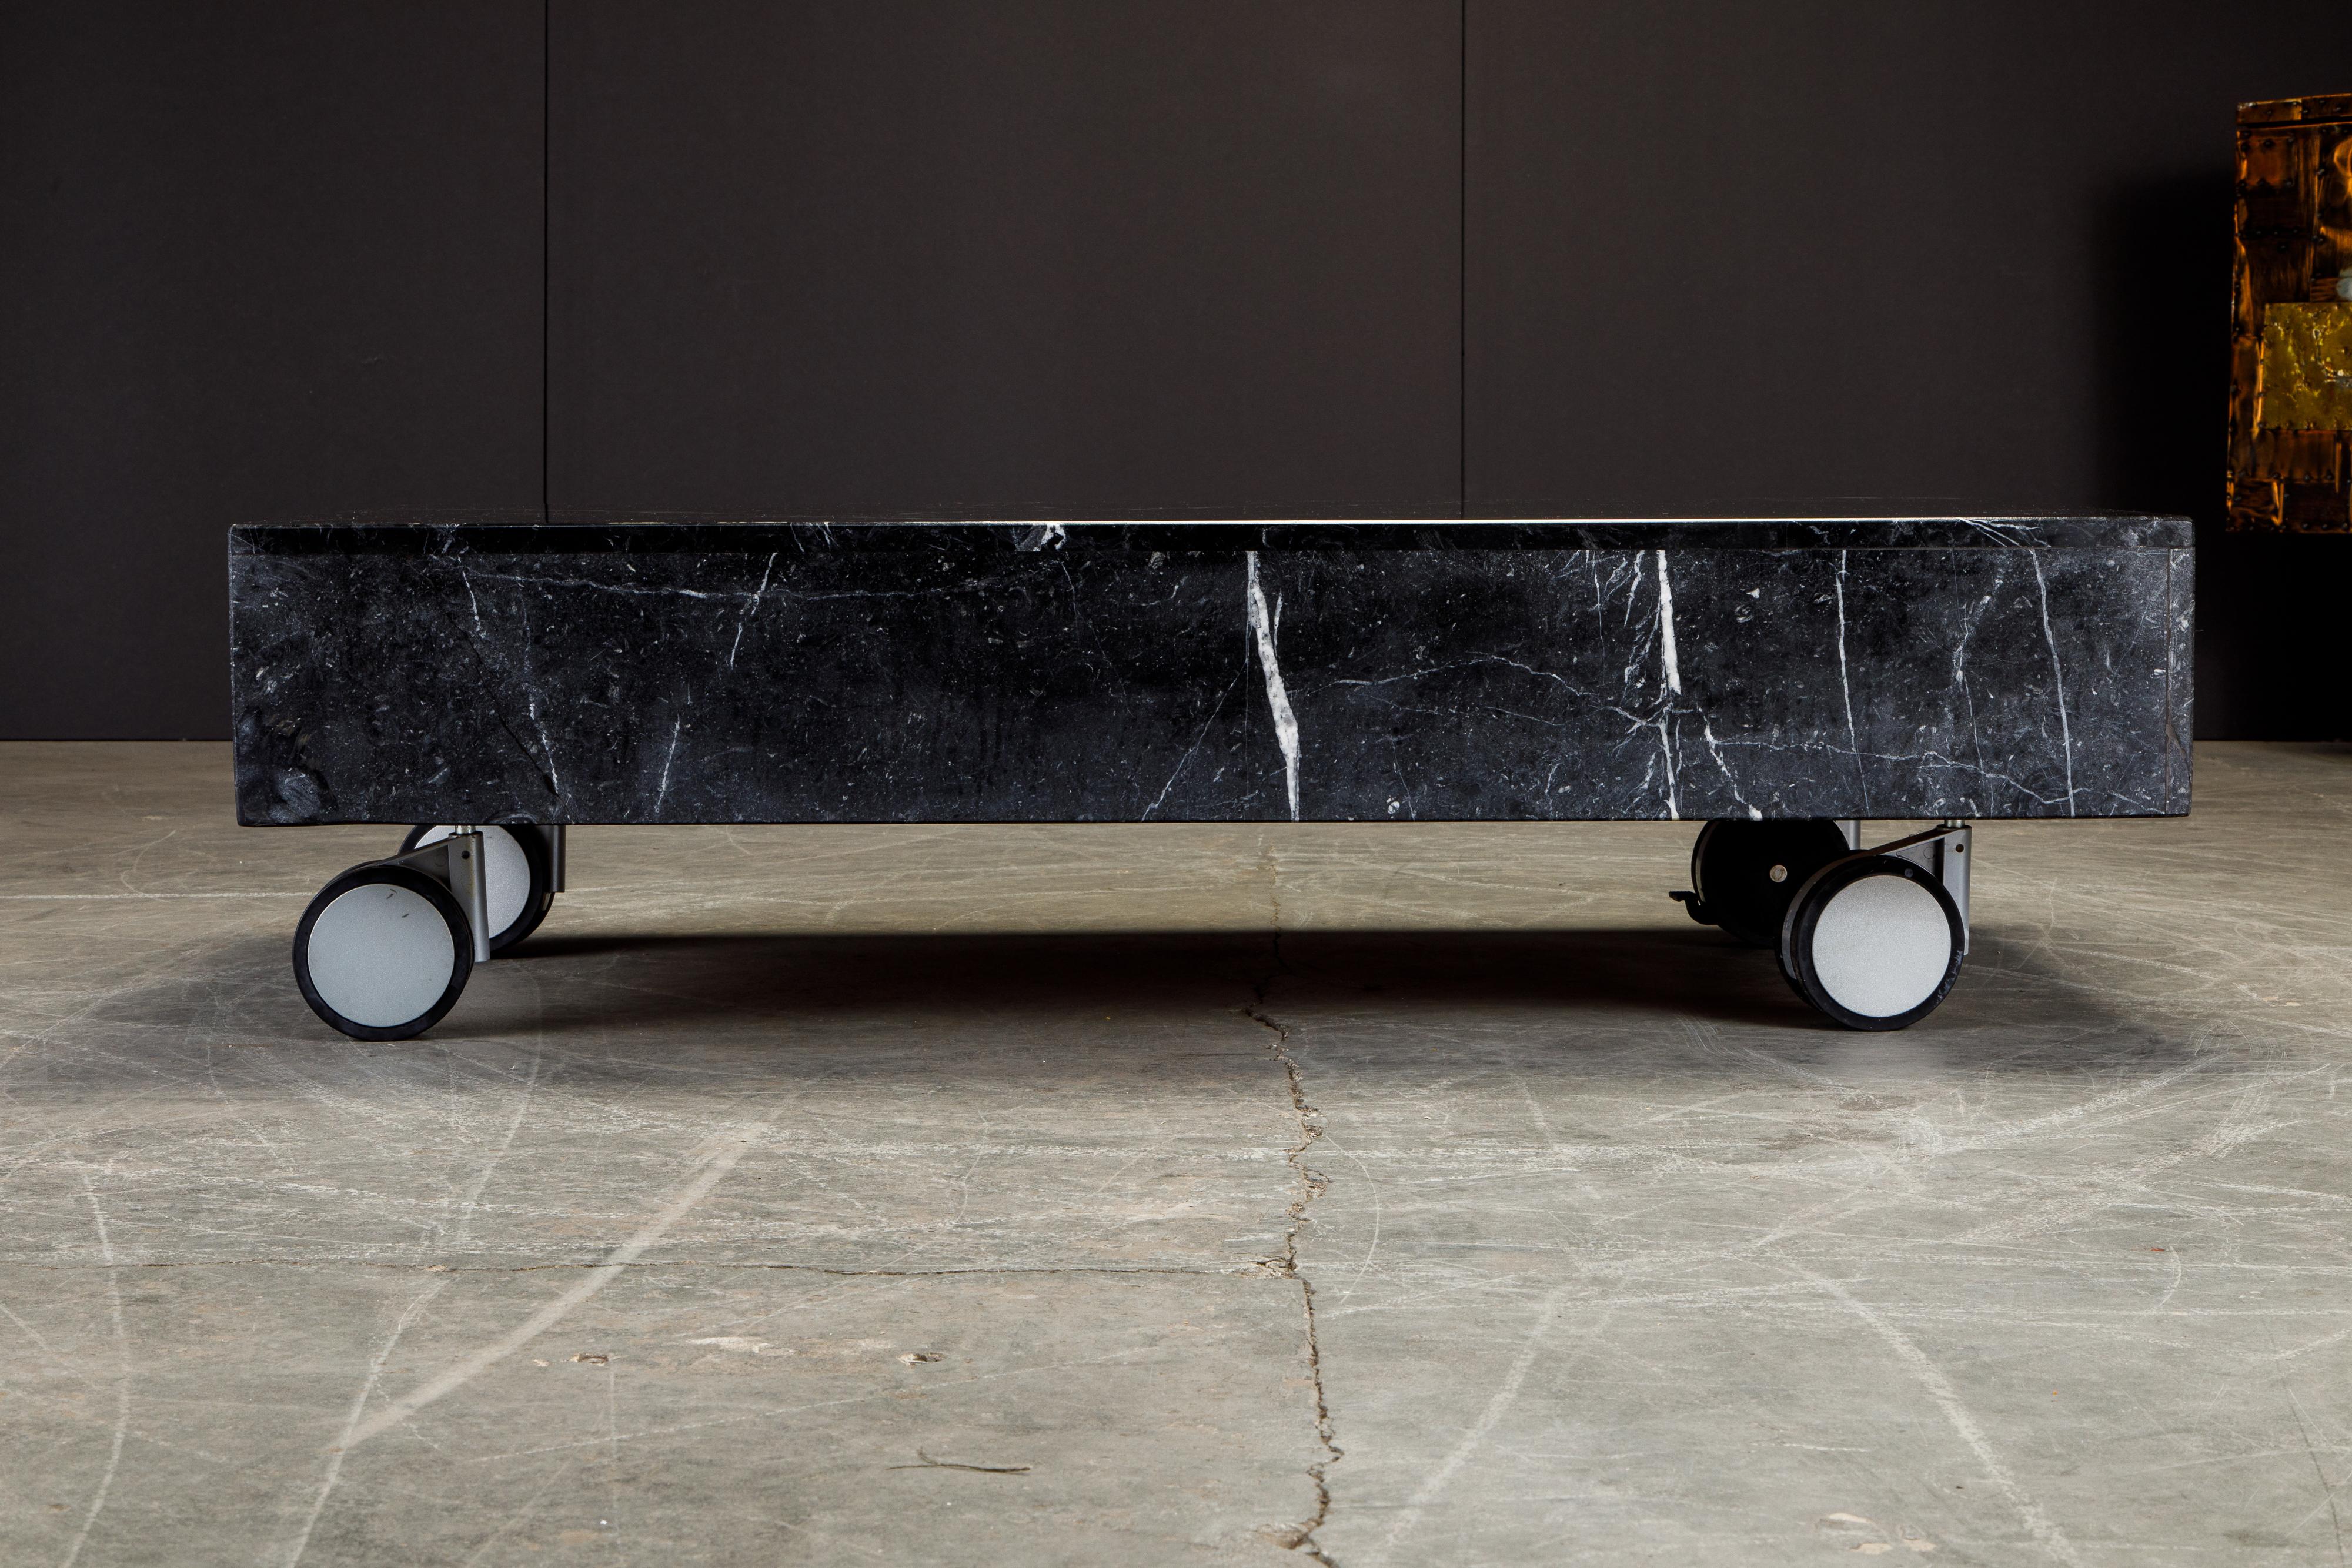 A sizable rectangular Post-Modern black marble coffee table on oversized Italian casters in similar style to Gae Aulenti. 

This Post-Modern cocktail table on casters would work great in a Post-Modern, Mid-Century Modern, Space Age Mod,